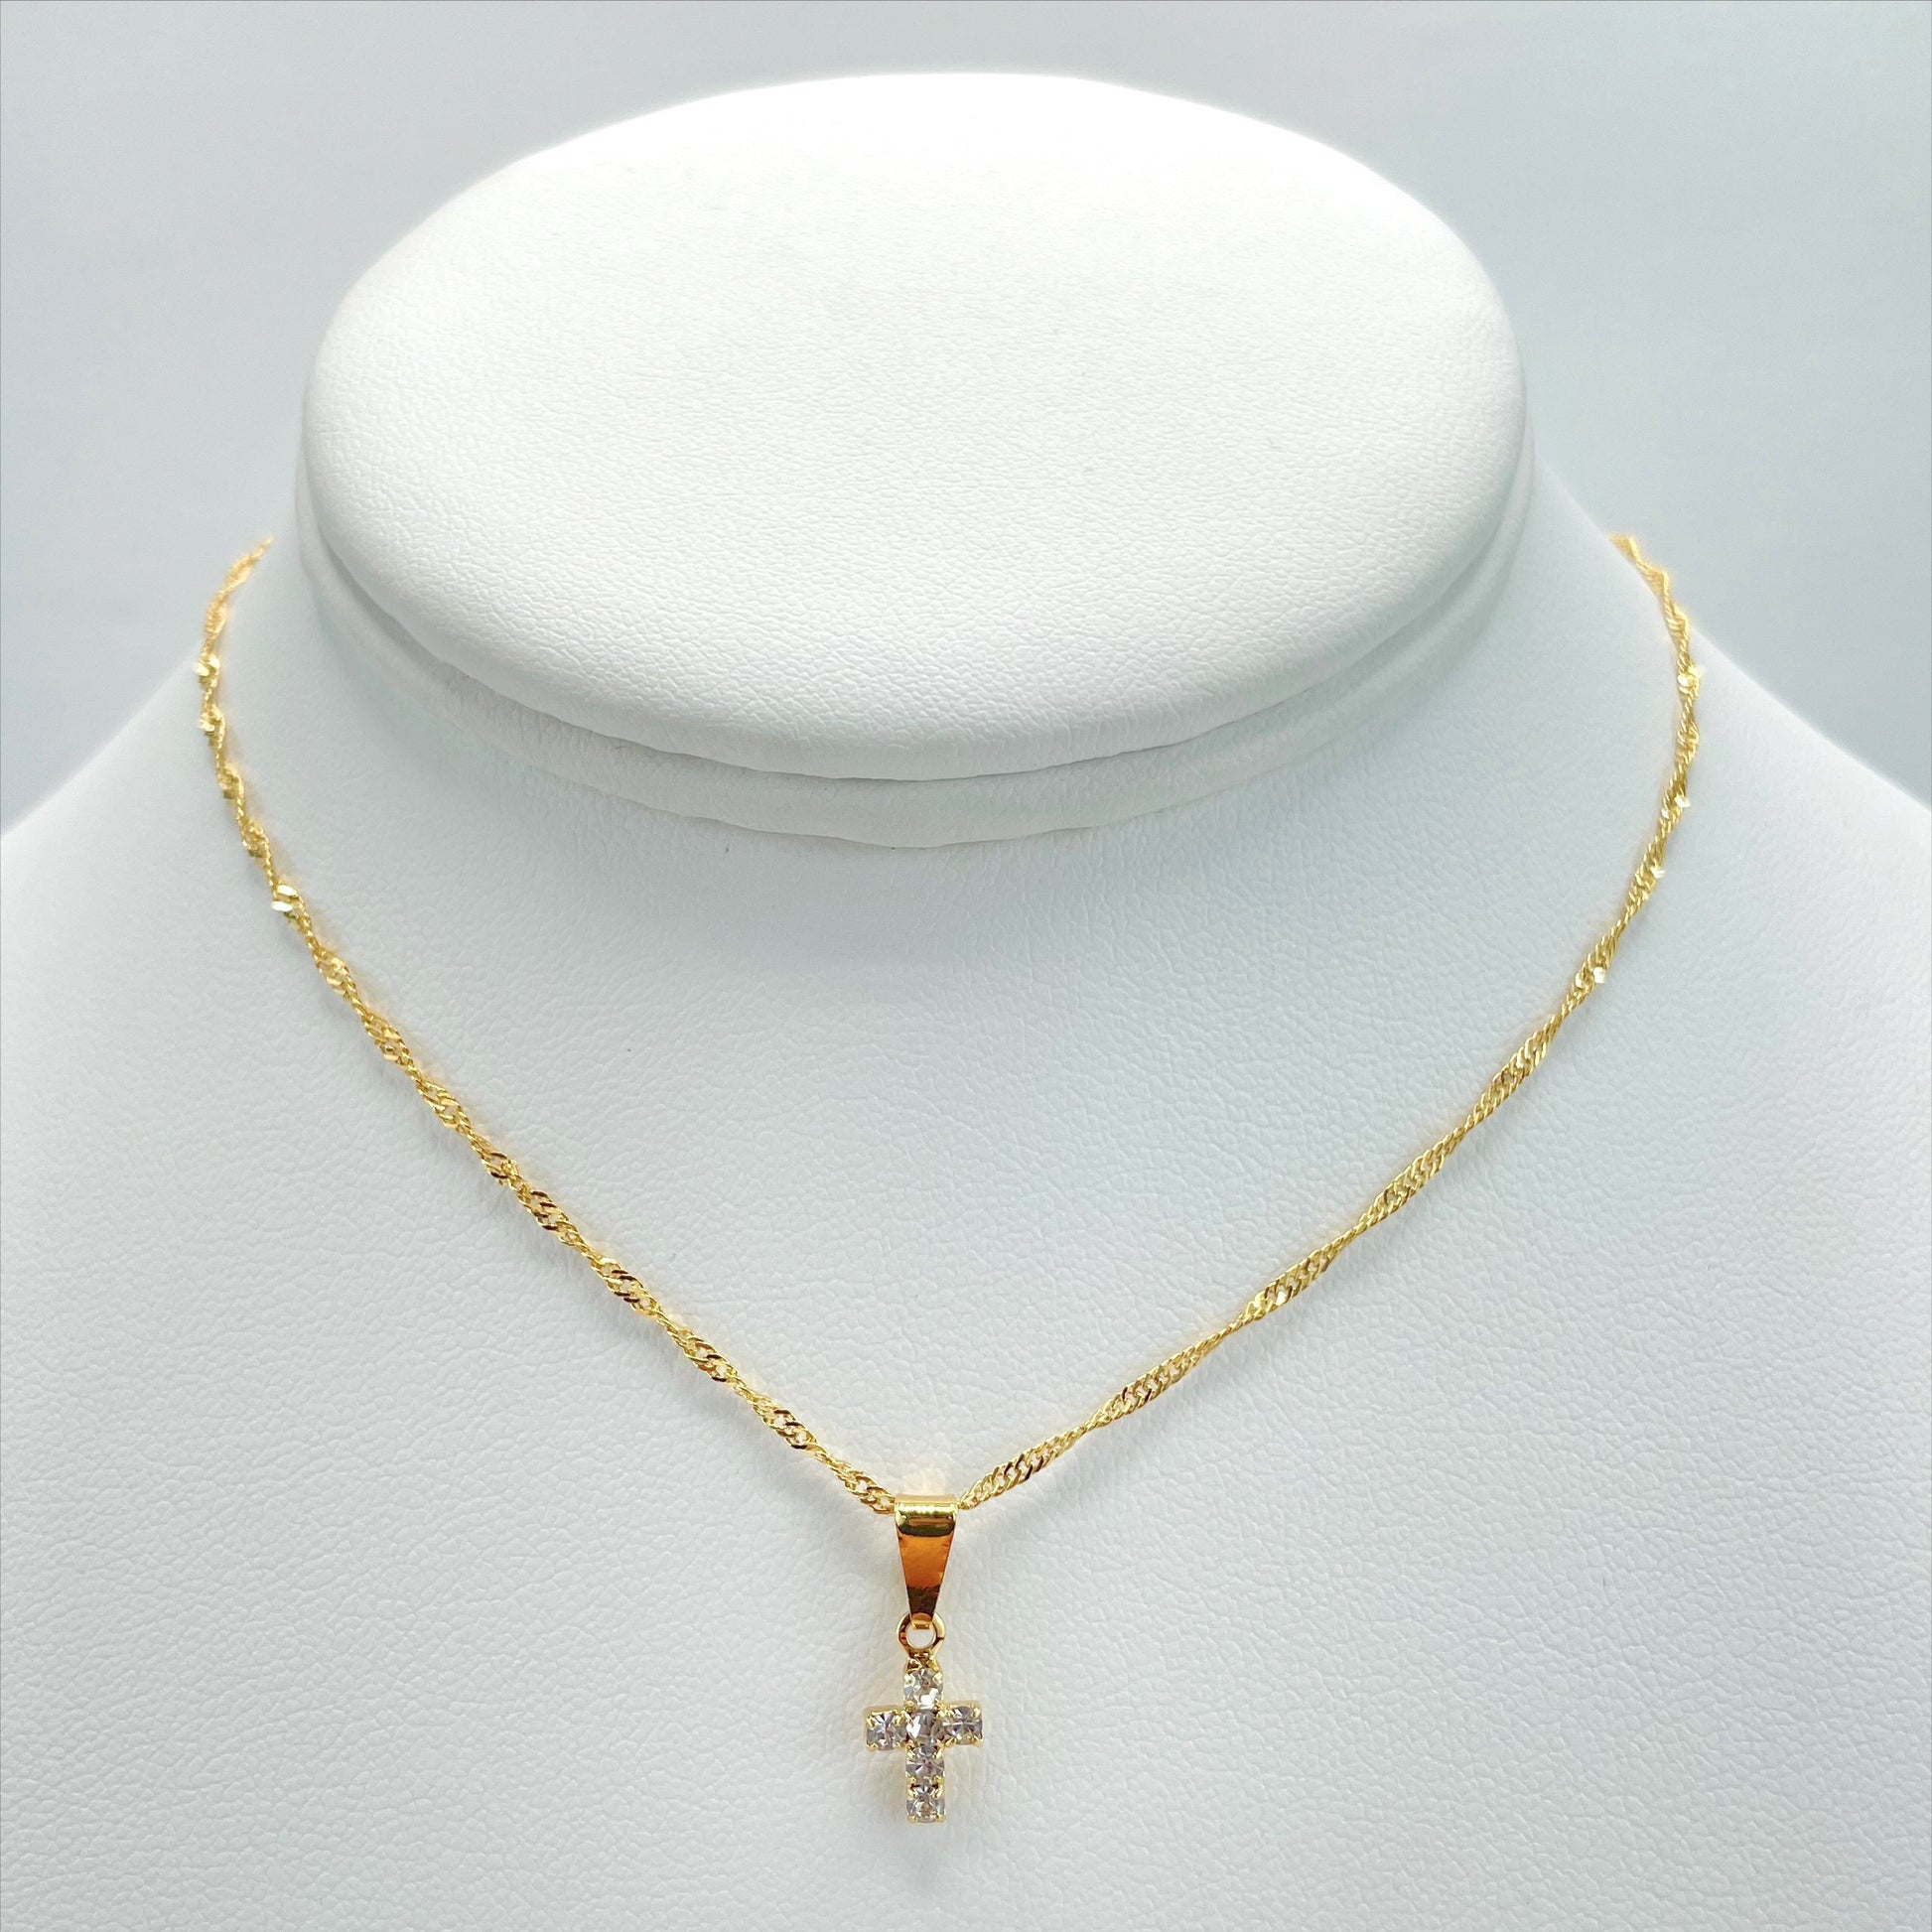 18k Gold Filled 1mm Singapore Necklace with Cubic Zirconia Cross Charms, Necklace and Earrings Set, Wholesale Jewelry Making Supplies